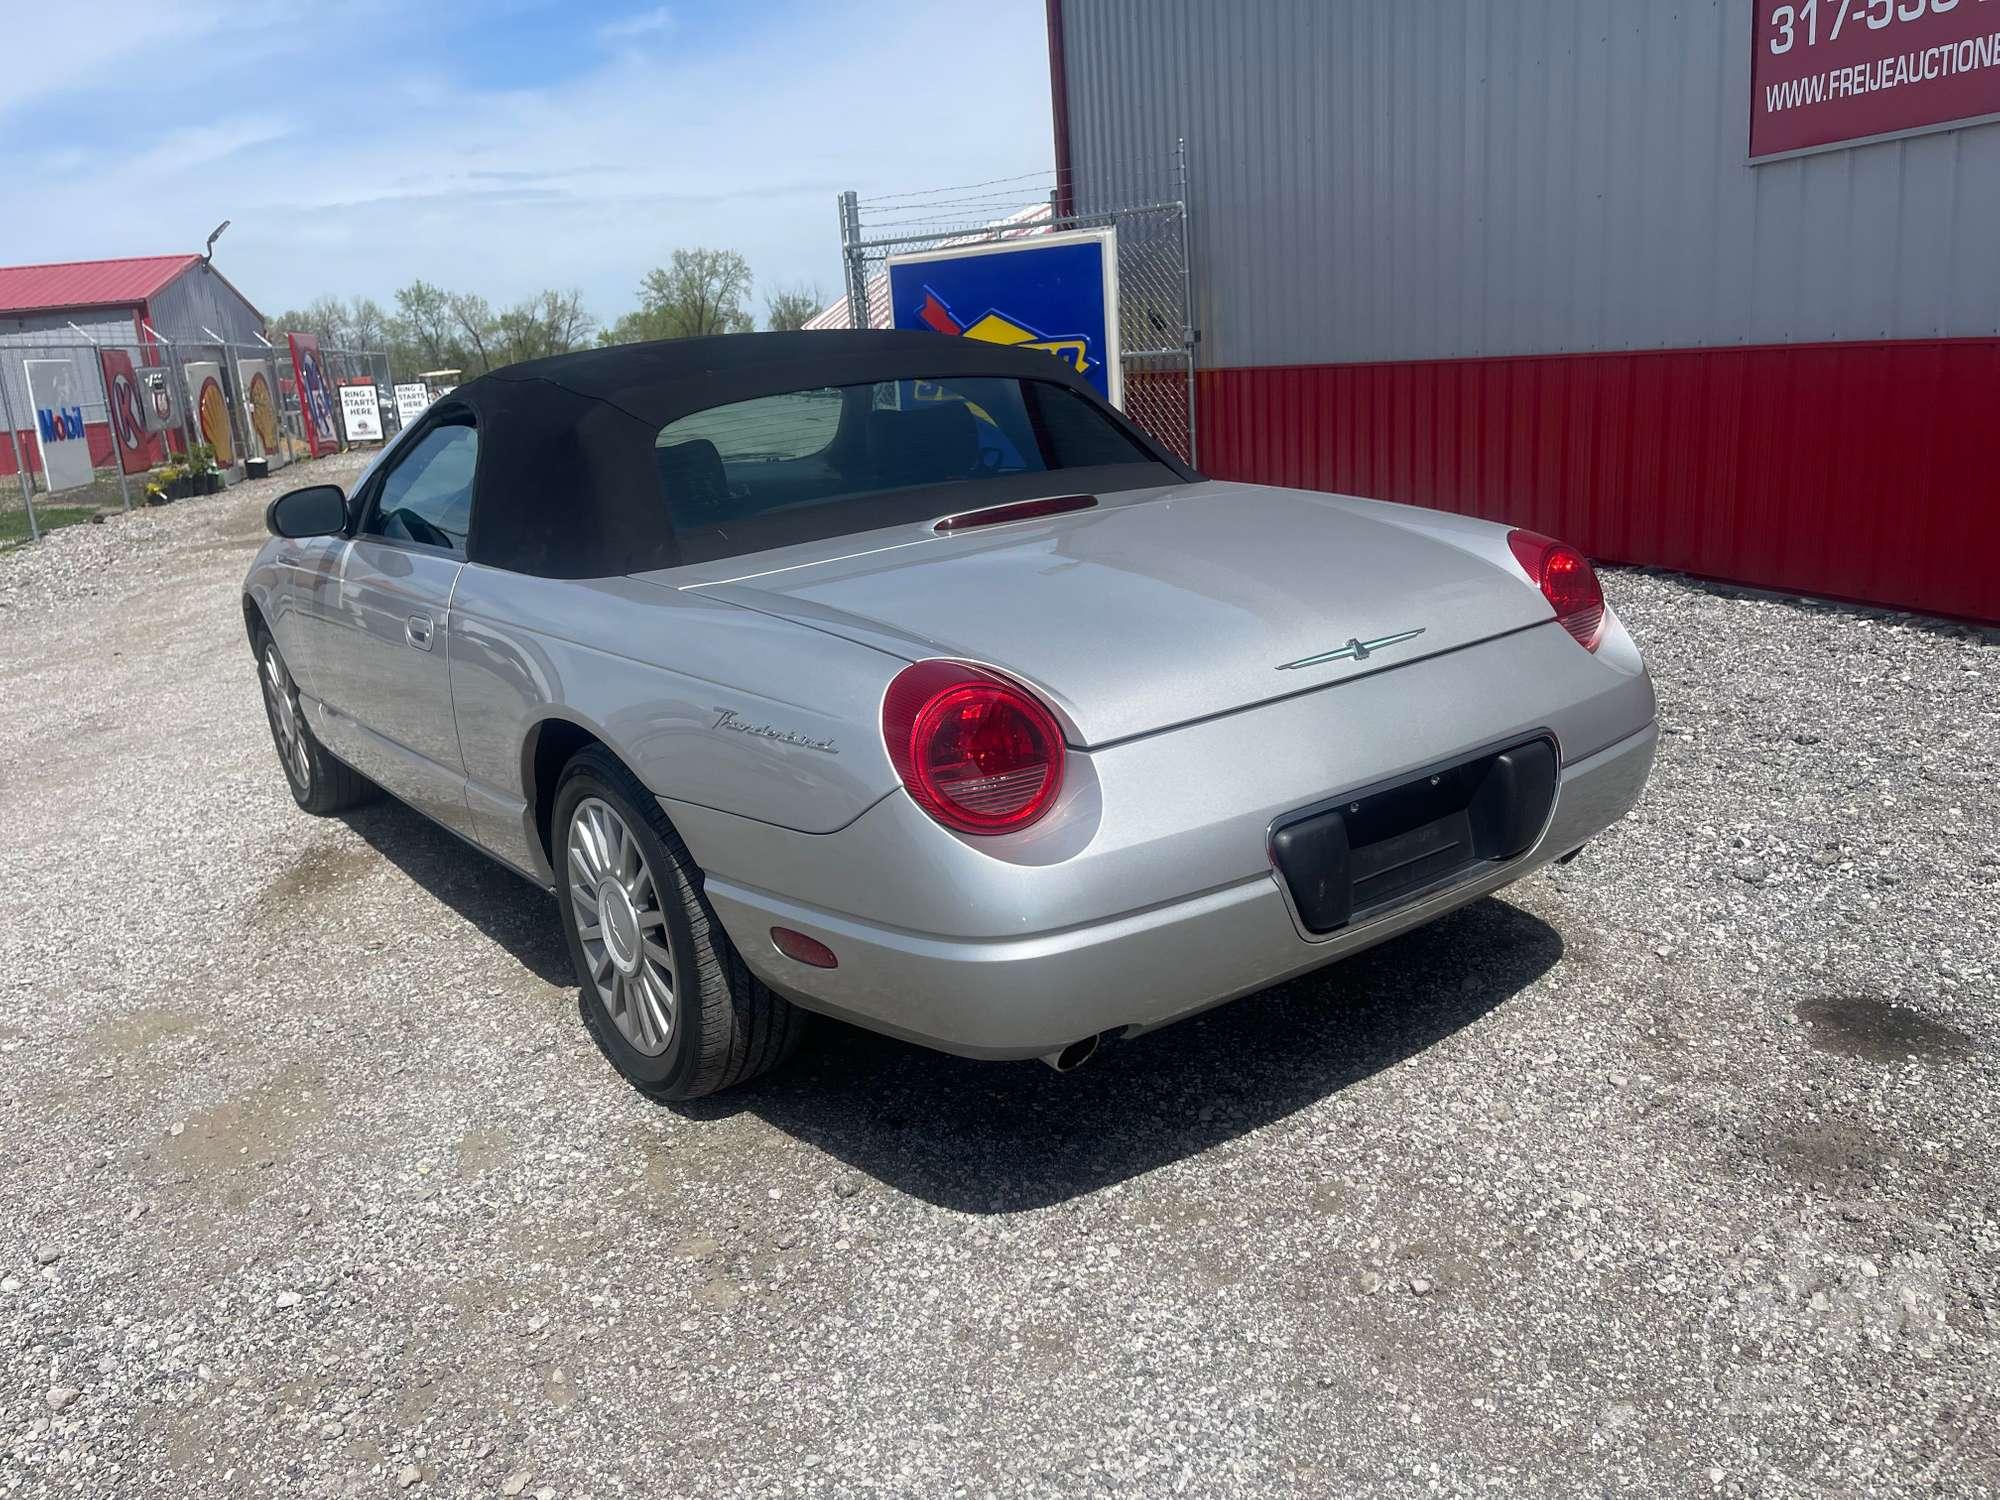 2005 FORD THUNDERBIRD VIN: 1FAHP60A05Y106702 COUPE